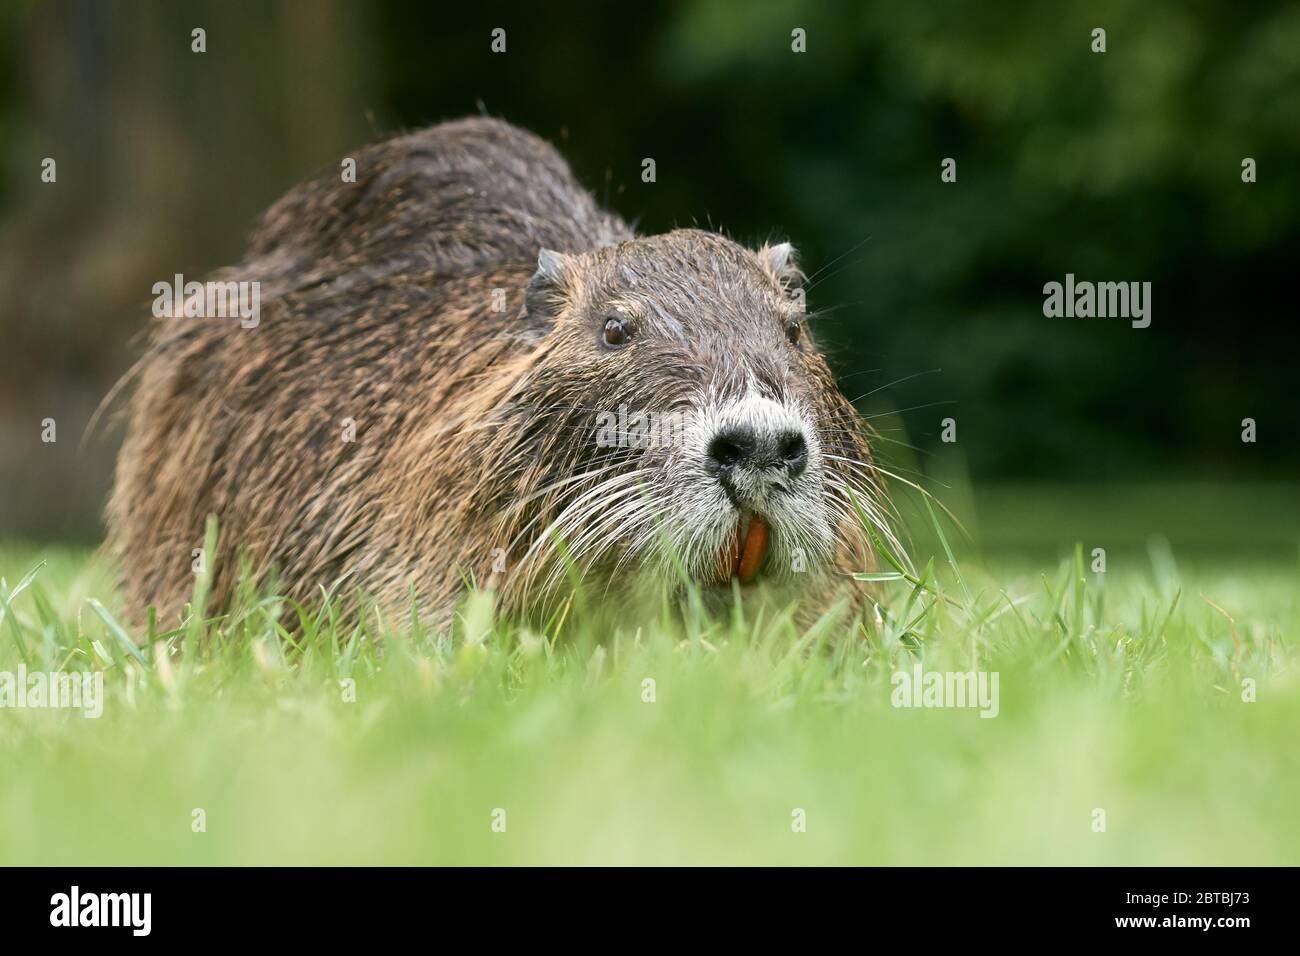 Close-up of Nutria river rat (Myocastor coypus) in grass showing its large orange teeth Stock Photo